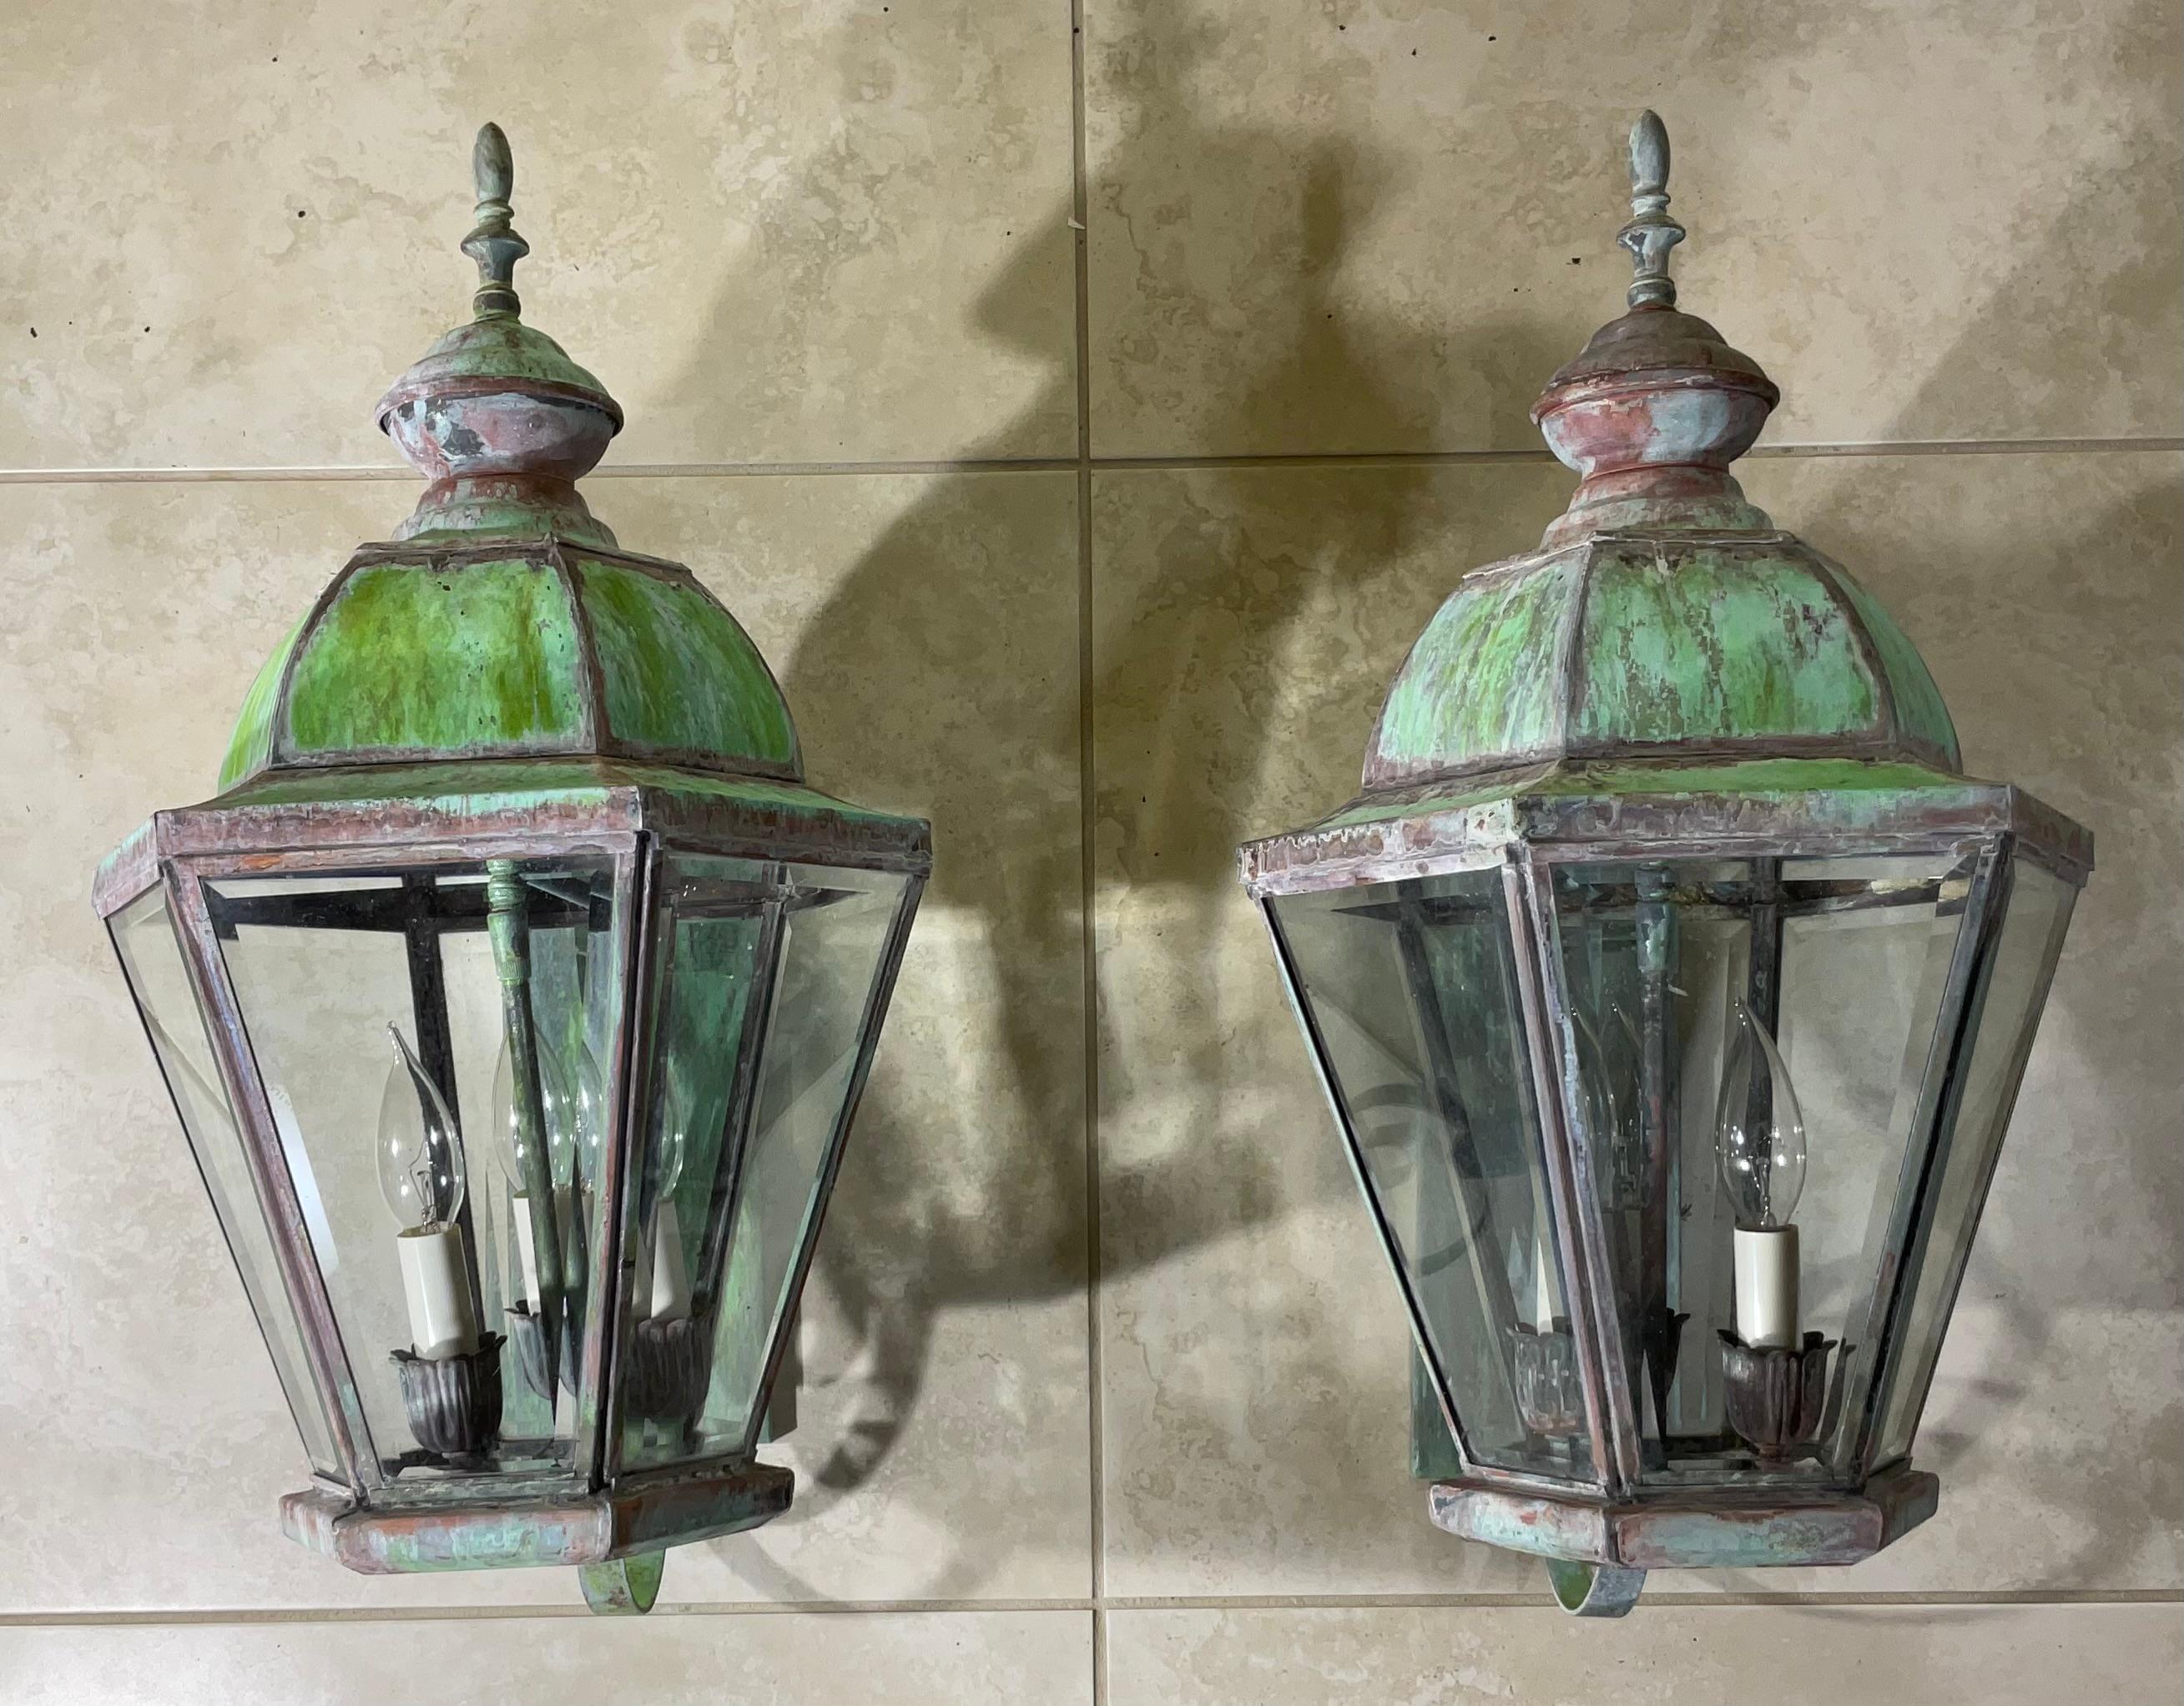 Beautiful pair of vintage wall lanterns hand crafted  from solid brass with three 40 watt  lights each .
Nicly oxidised patina , bell the glass electrified, and ready to use.
Will look great indoor or outdoor.
Backplate size : 11” x 4”.5